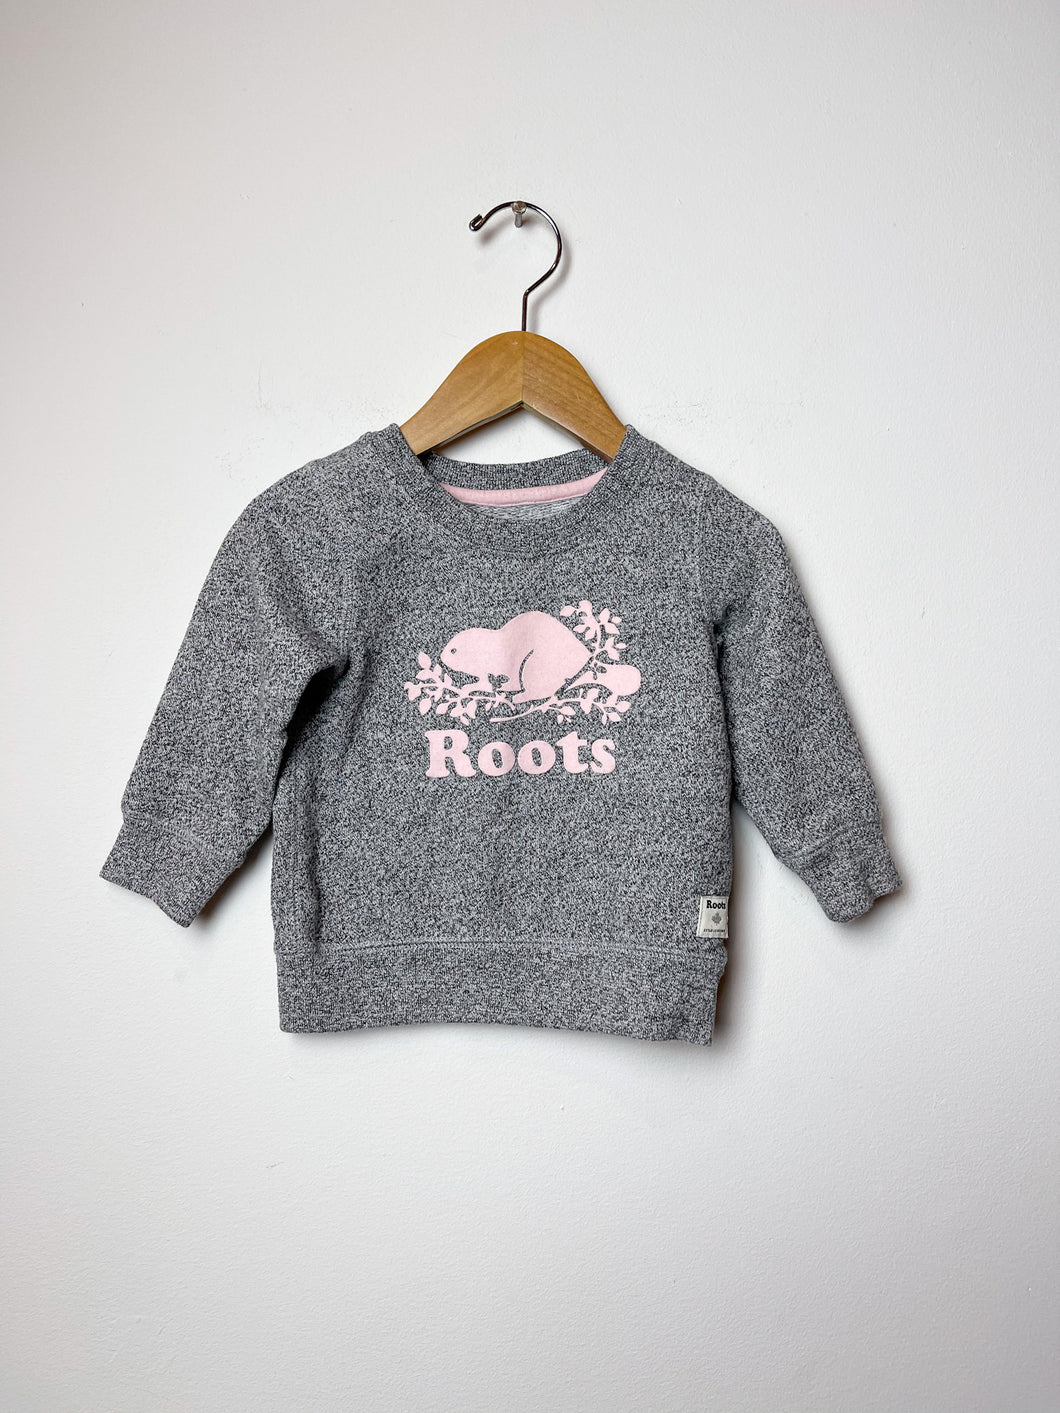 Girls Grey Roots Sweater Size 6-12 Months